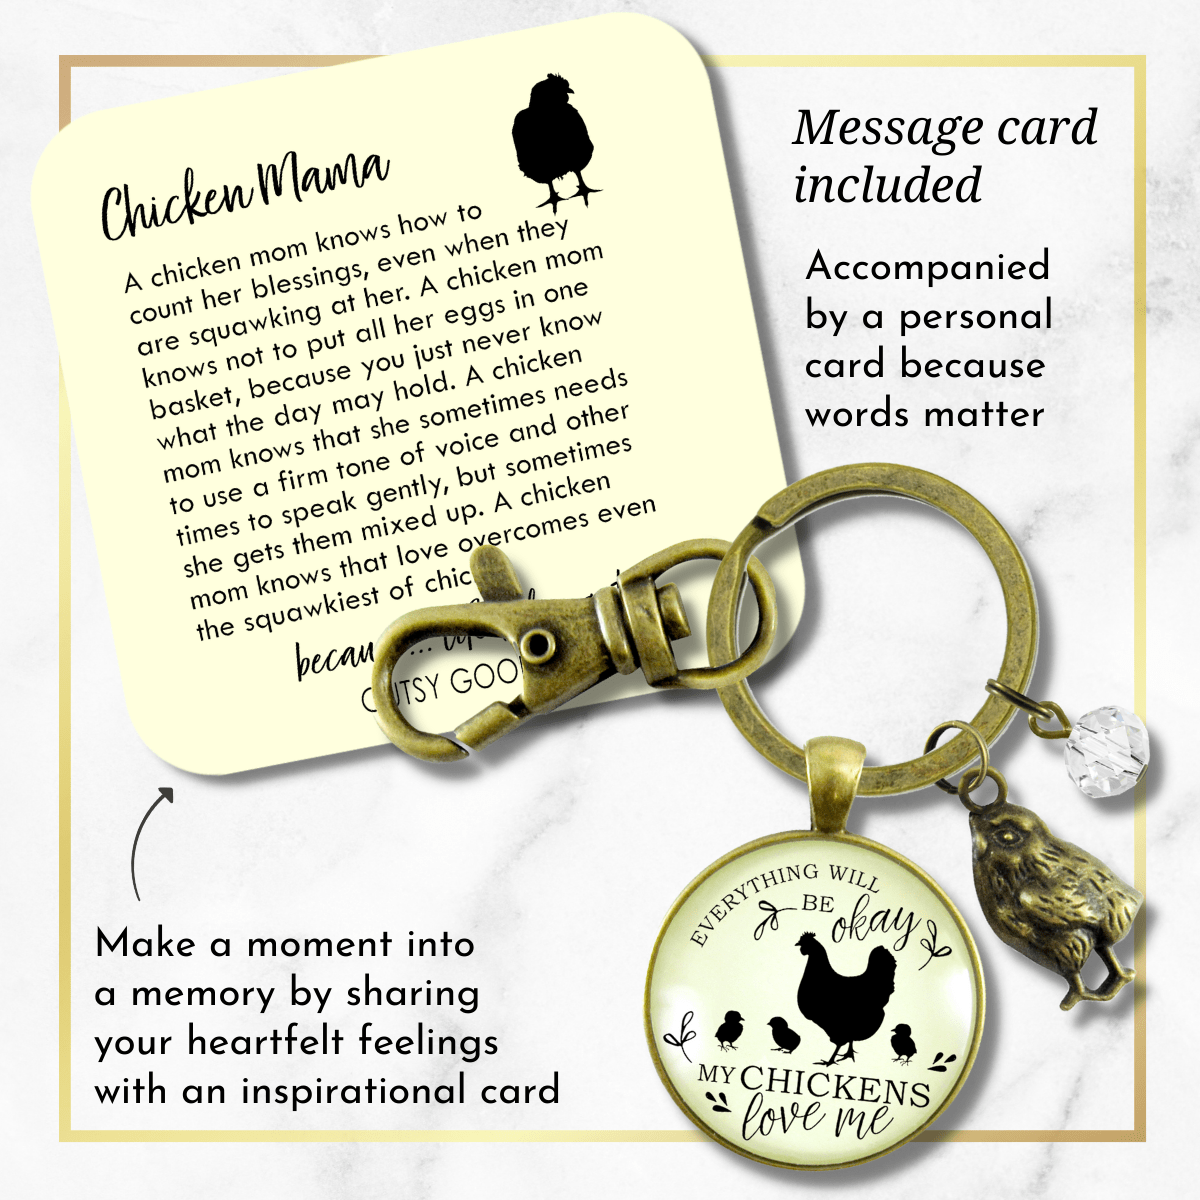 Chicken Keychain All is Okay My Chickens Love Me Farm Inspired Jewelry - Gutsy Goodness Handmade Jewelry;Chicken Keychain All Is Okay My Chickens Love Me Farm Inspired Jewelry - Gutsy Goodness Handmade Jewelry Gifts